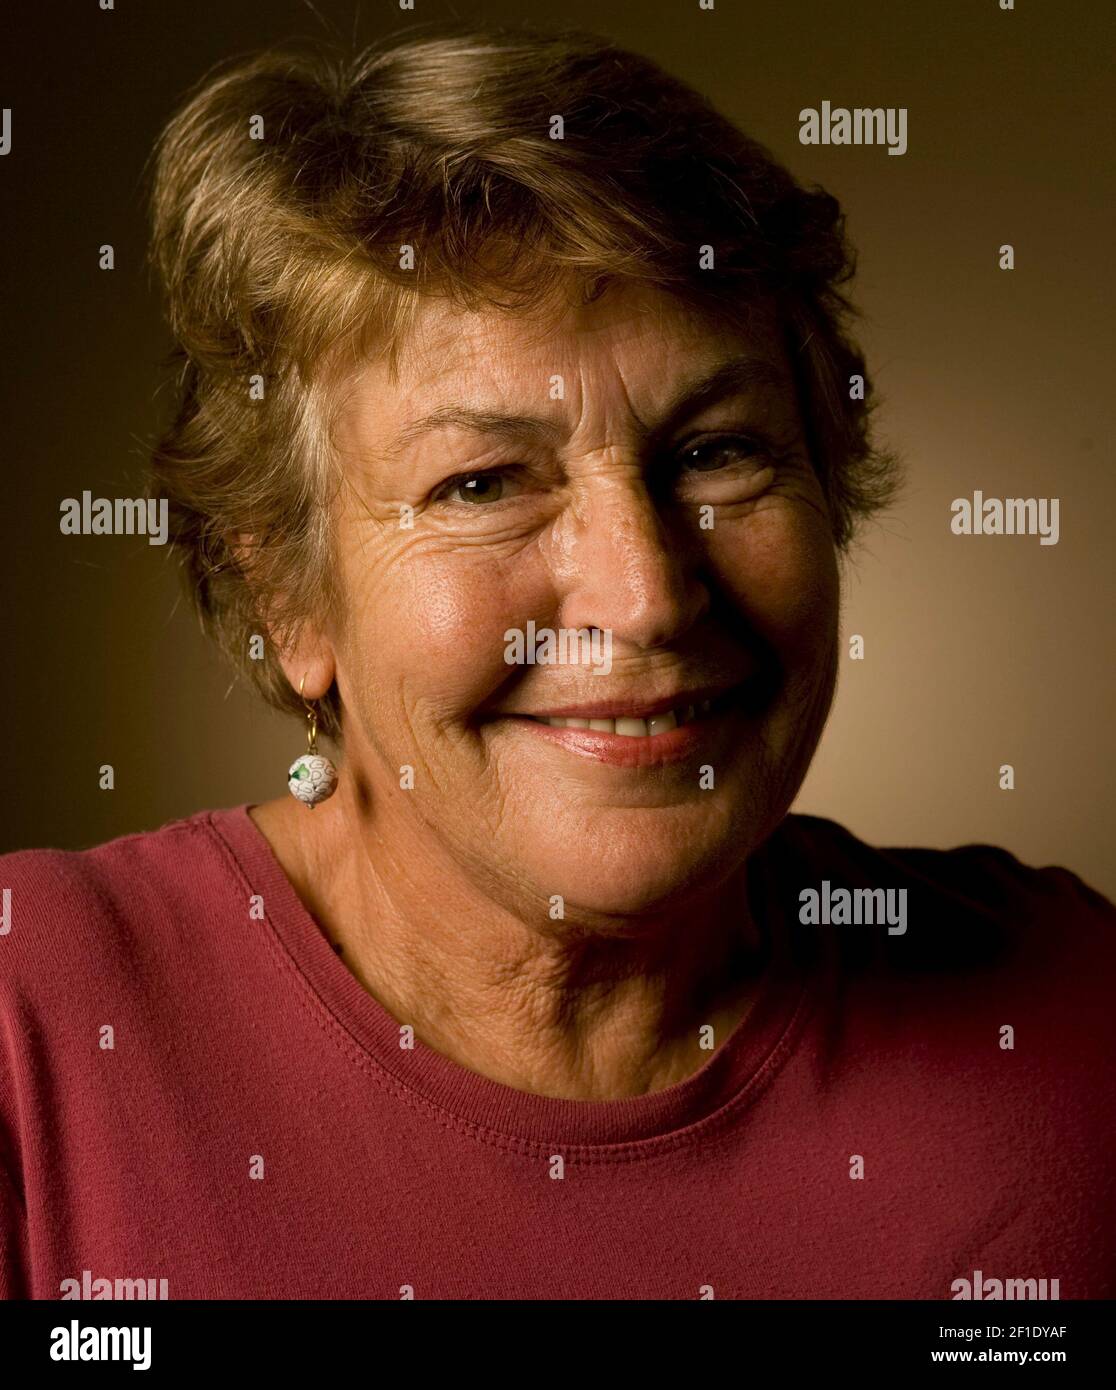 April 15, 2008; Los Angeles, CA, USA; Portrait of singer Helen Reddy, who has a new book 'The Woman I am'. Reddy is best known for her Grammy-winning song 'I Am Woman'. Photographed at the Orlando Hotel in Los Angeles. Mandatory Credit: Robert Hanashiro,-USA TODAY/Sipa USA Stock Photo